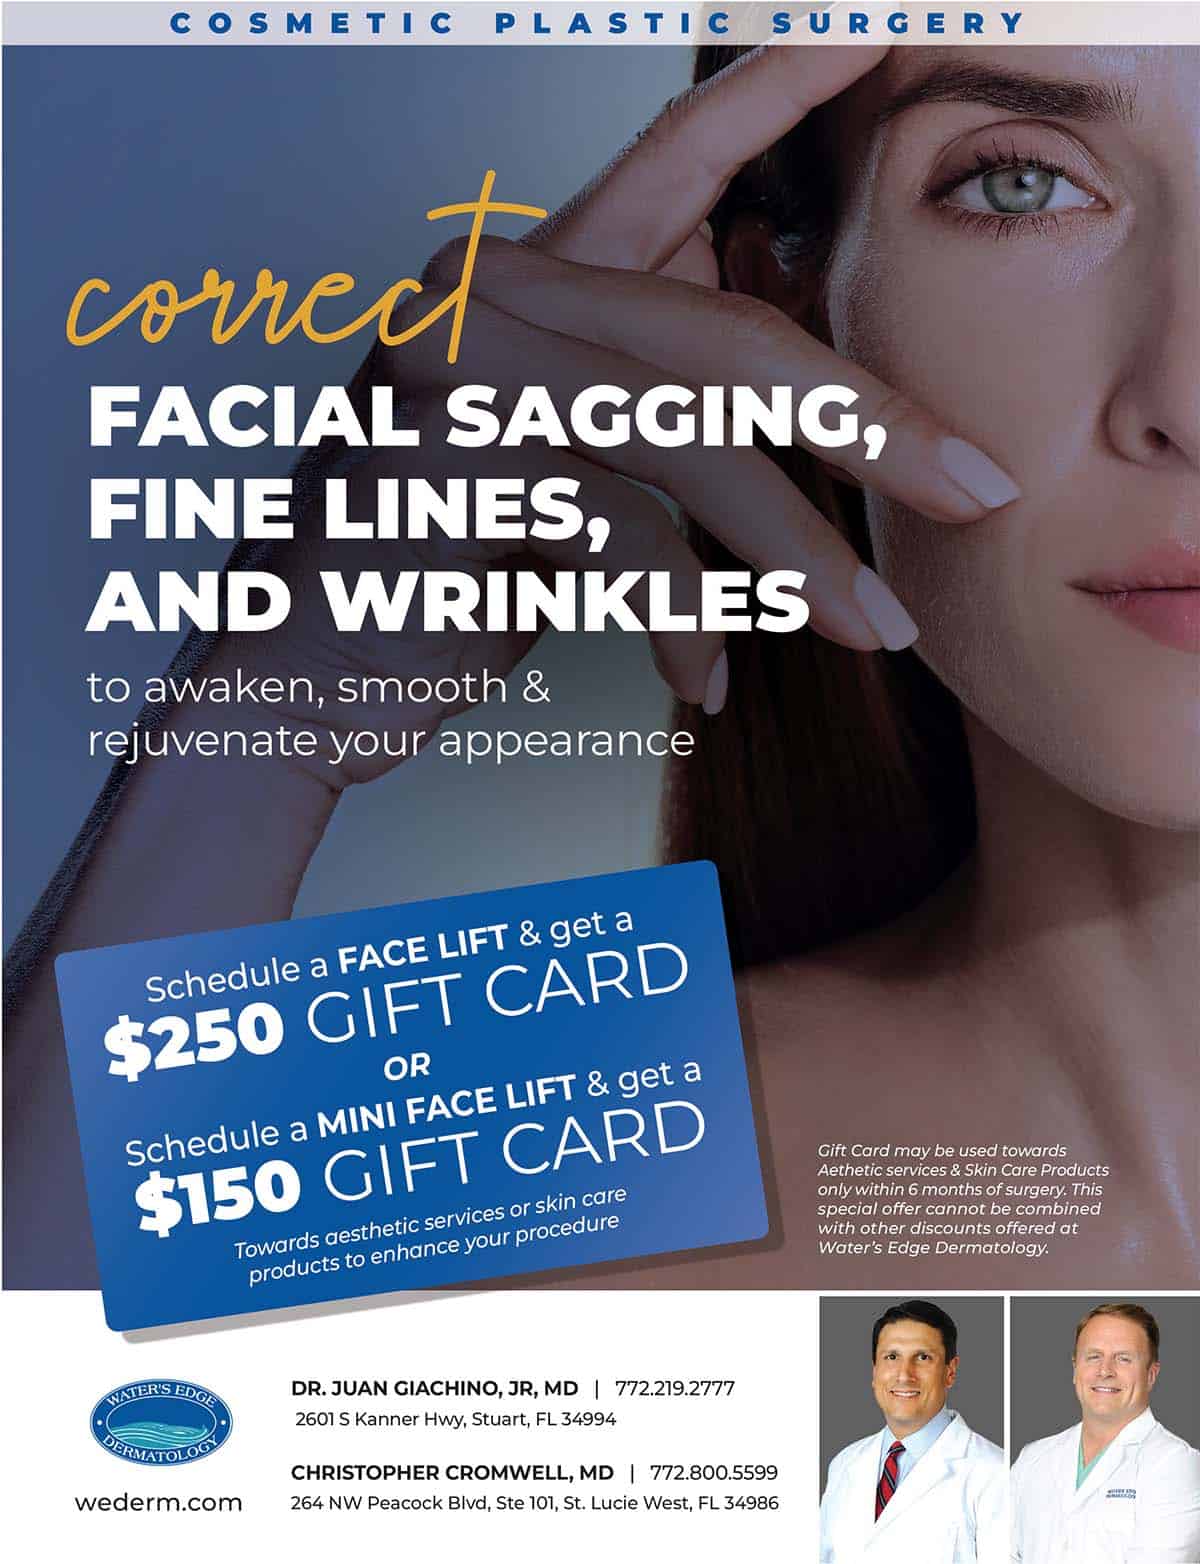 Cosmetic Plastic Surgery Promotion